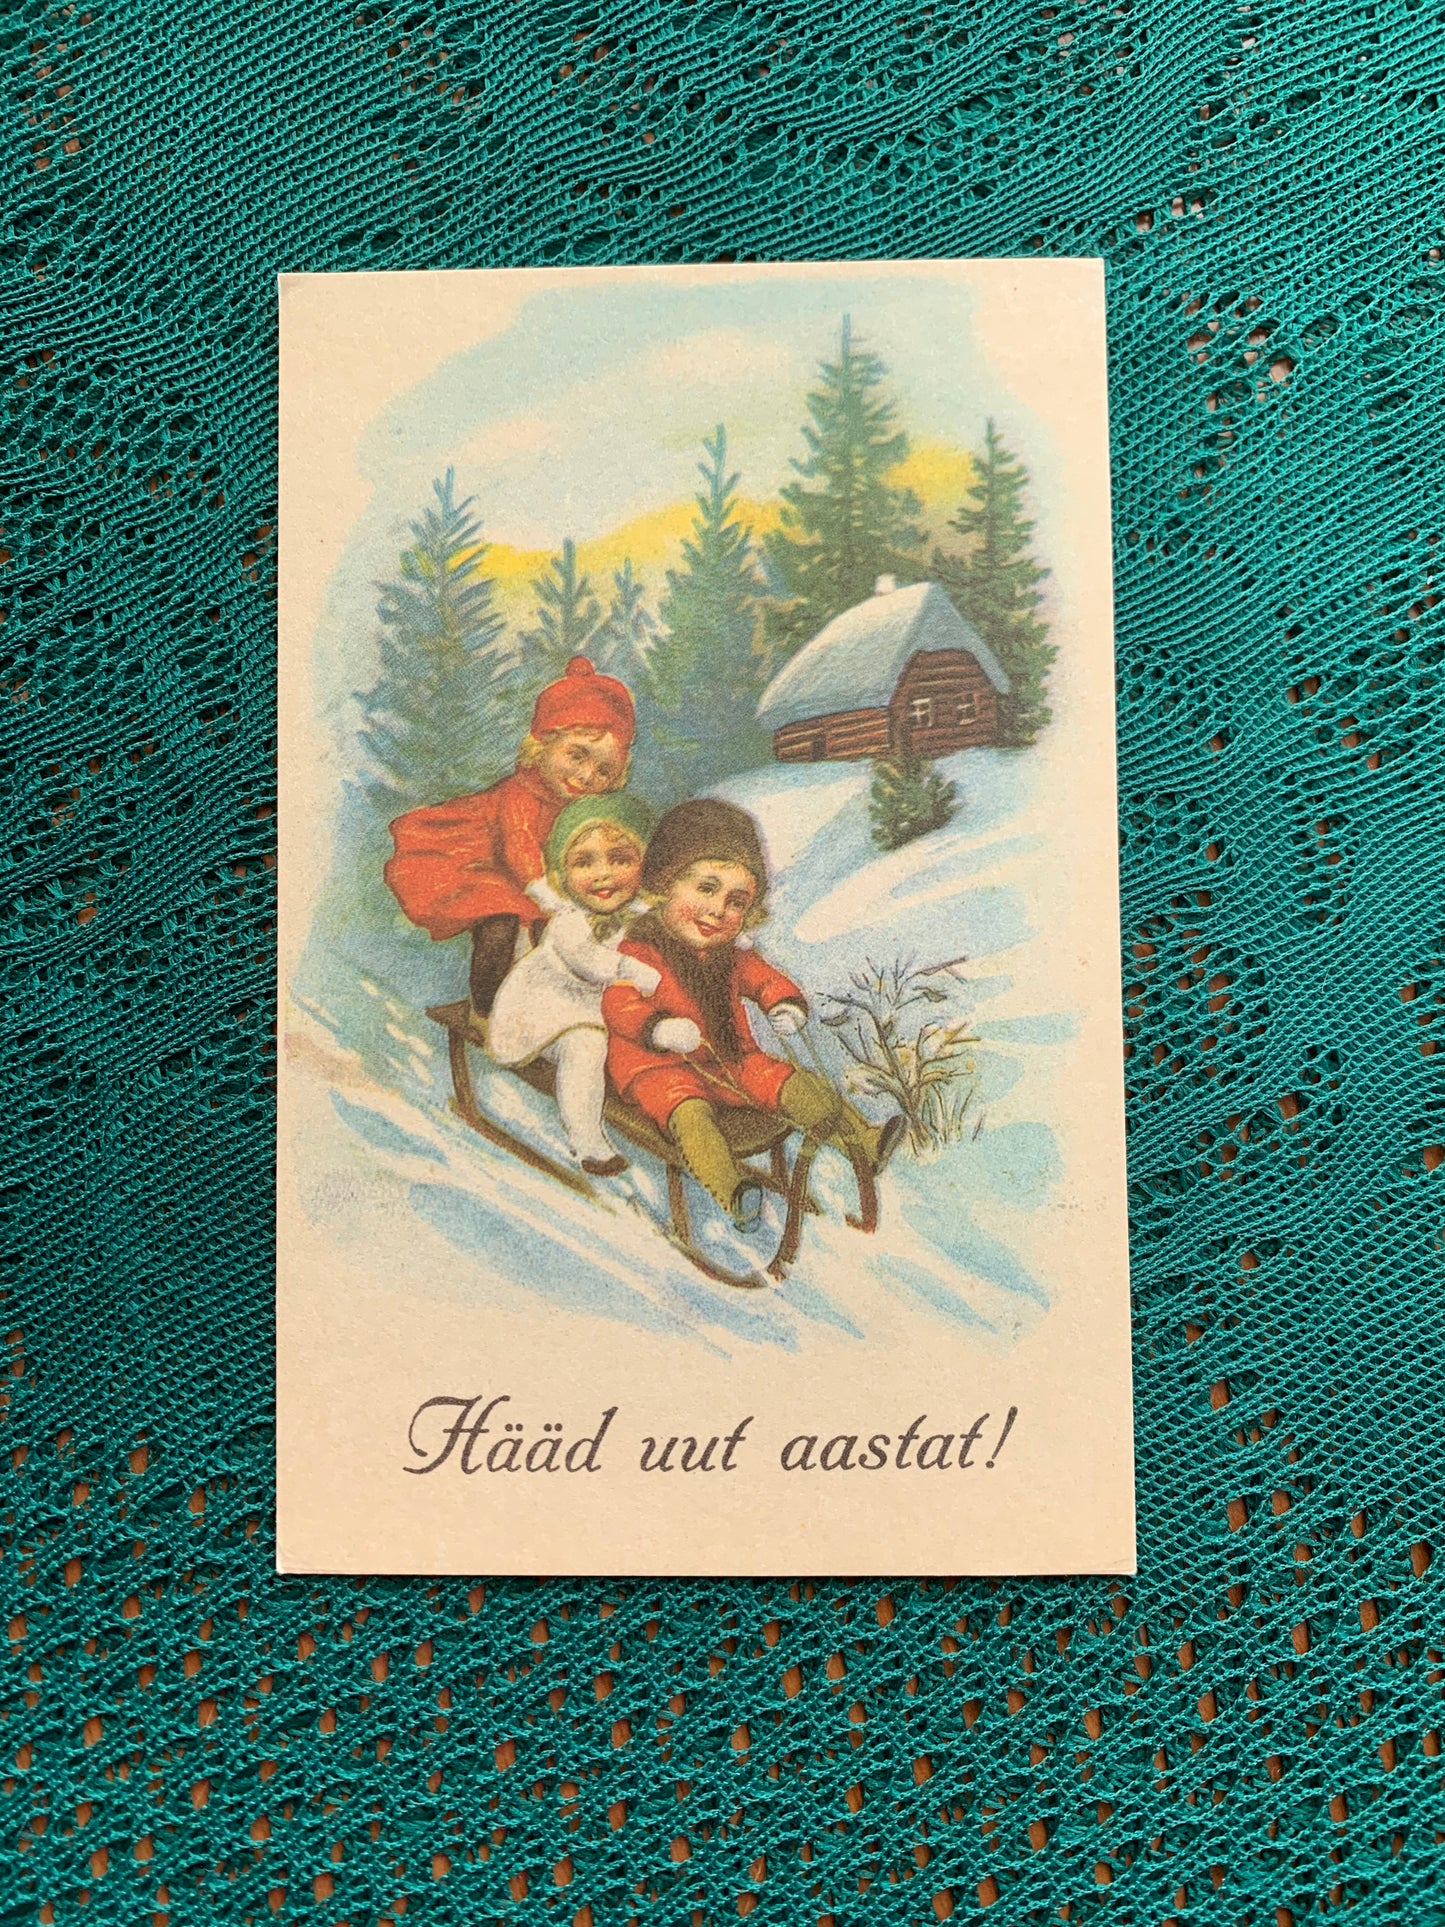 Estonian Christmas / New Year Greeting card - Children having a slide - Old Farm House - Winter - Reproduction from old postcard - 1988 - unused